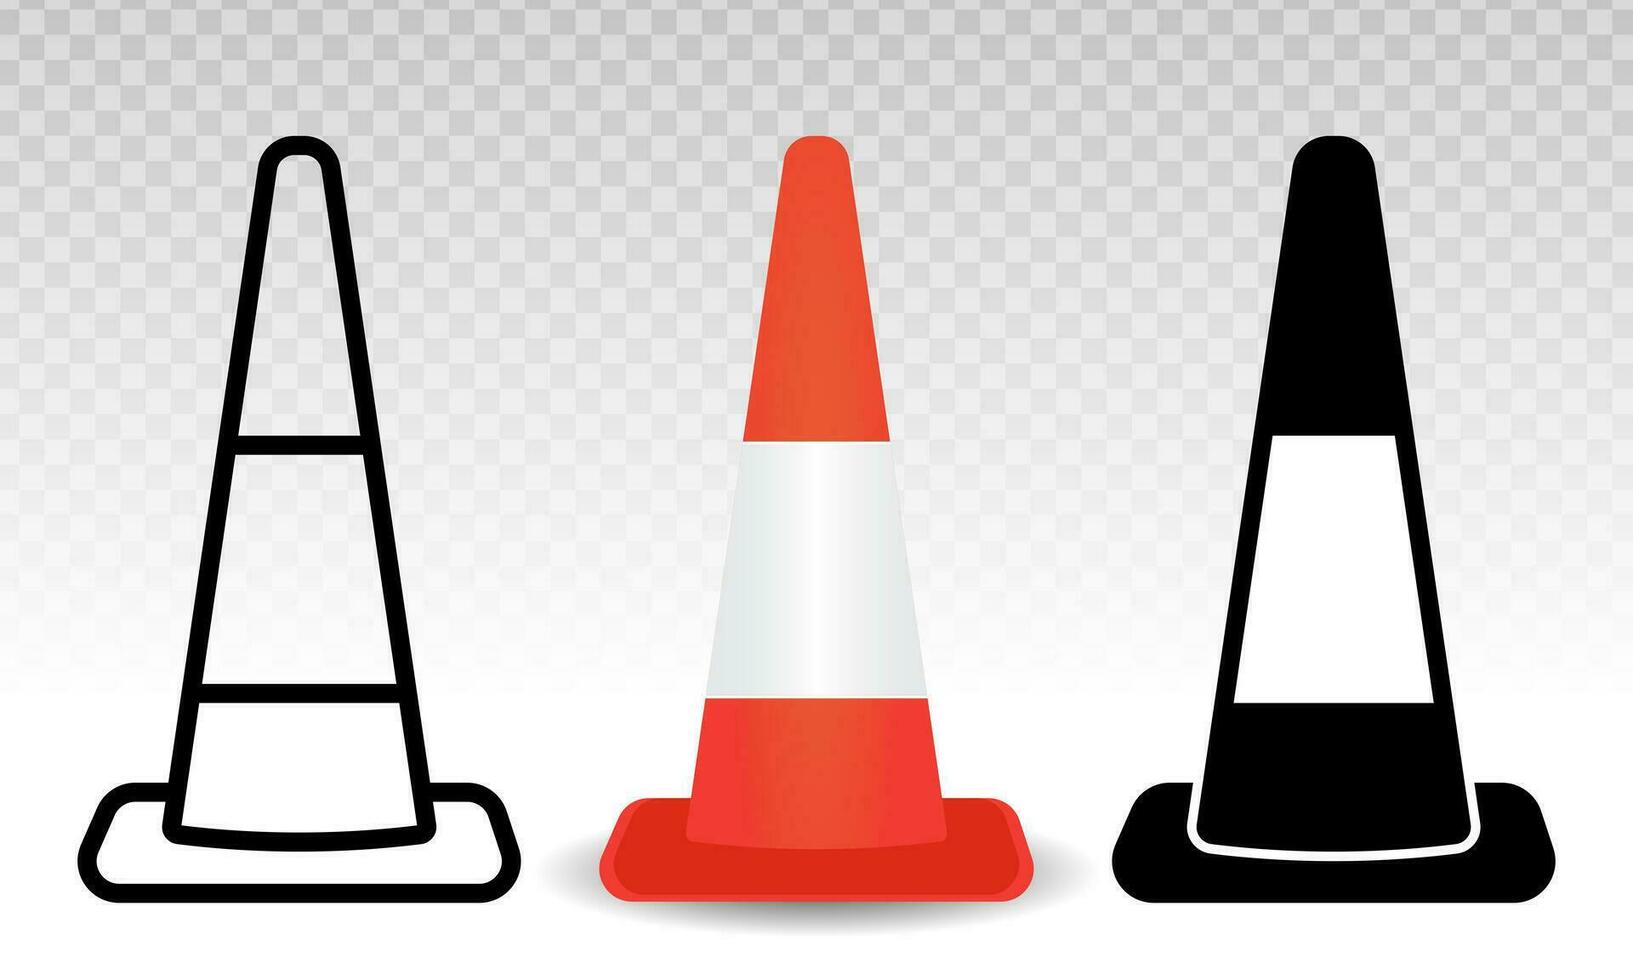 traffic cone or road pylon flat icons for apps and websites vector